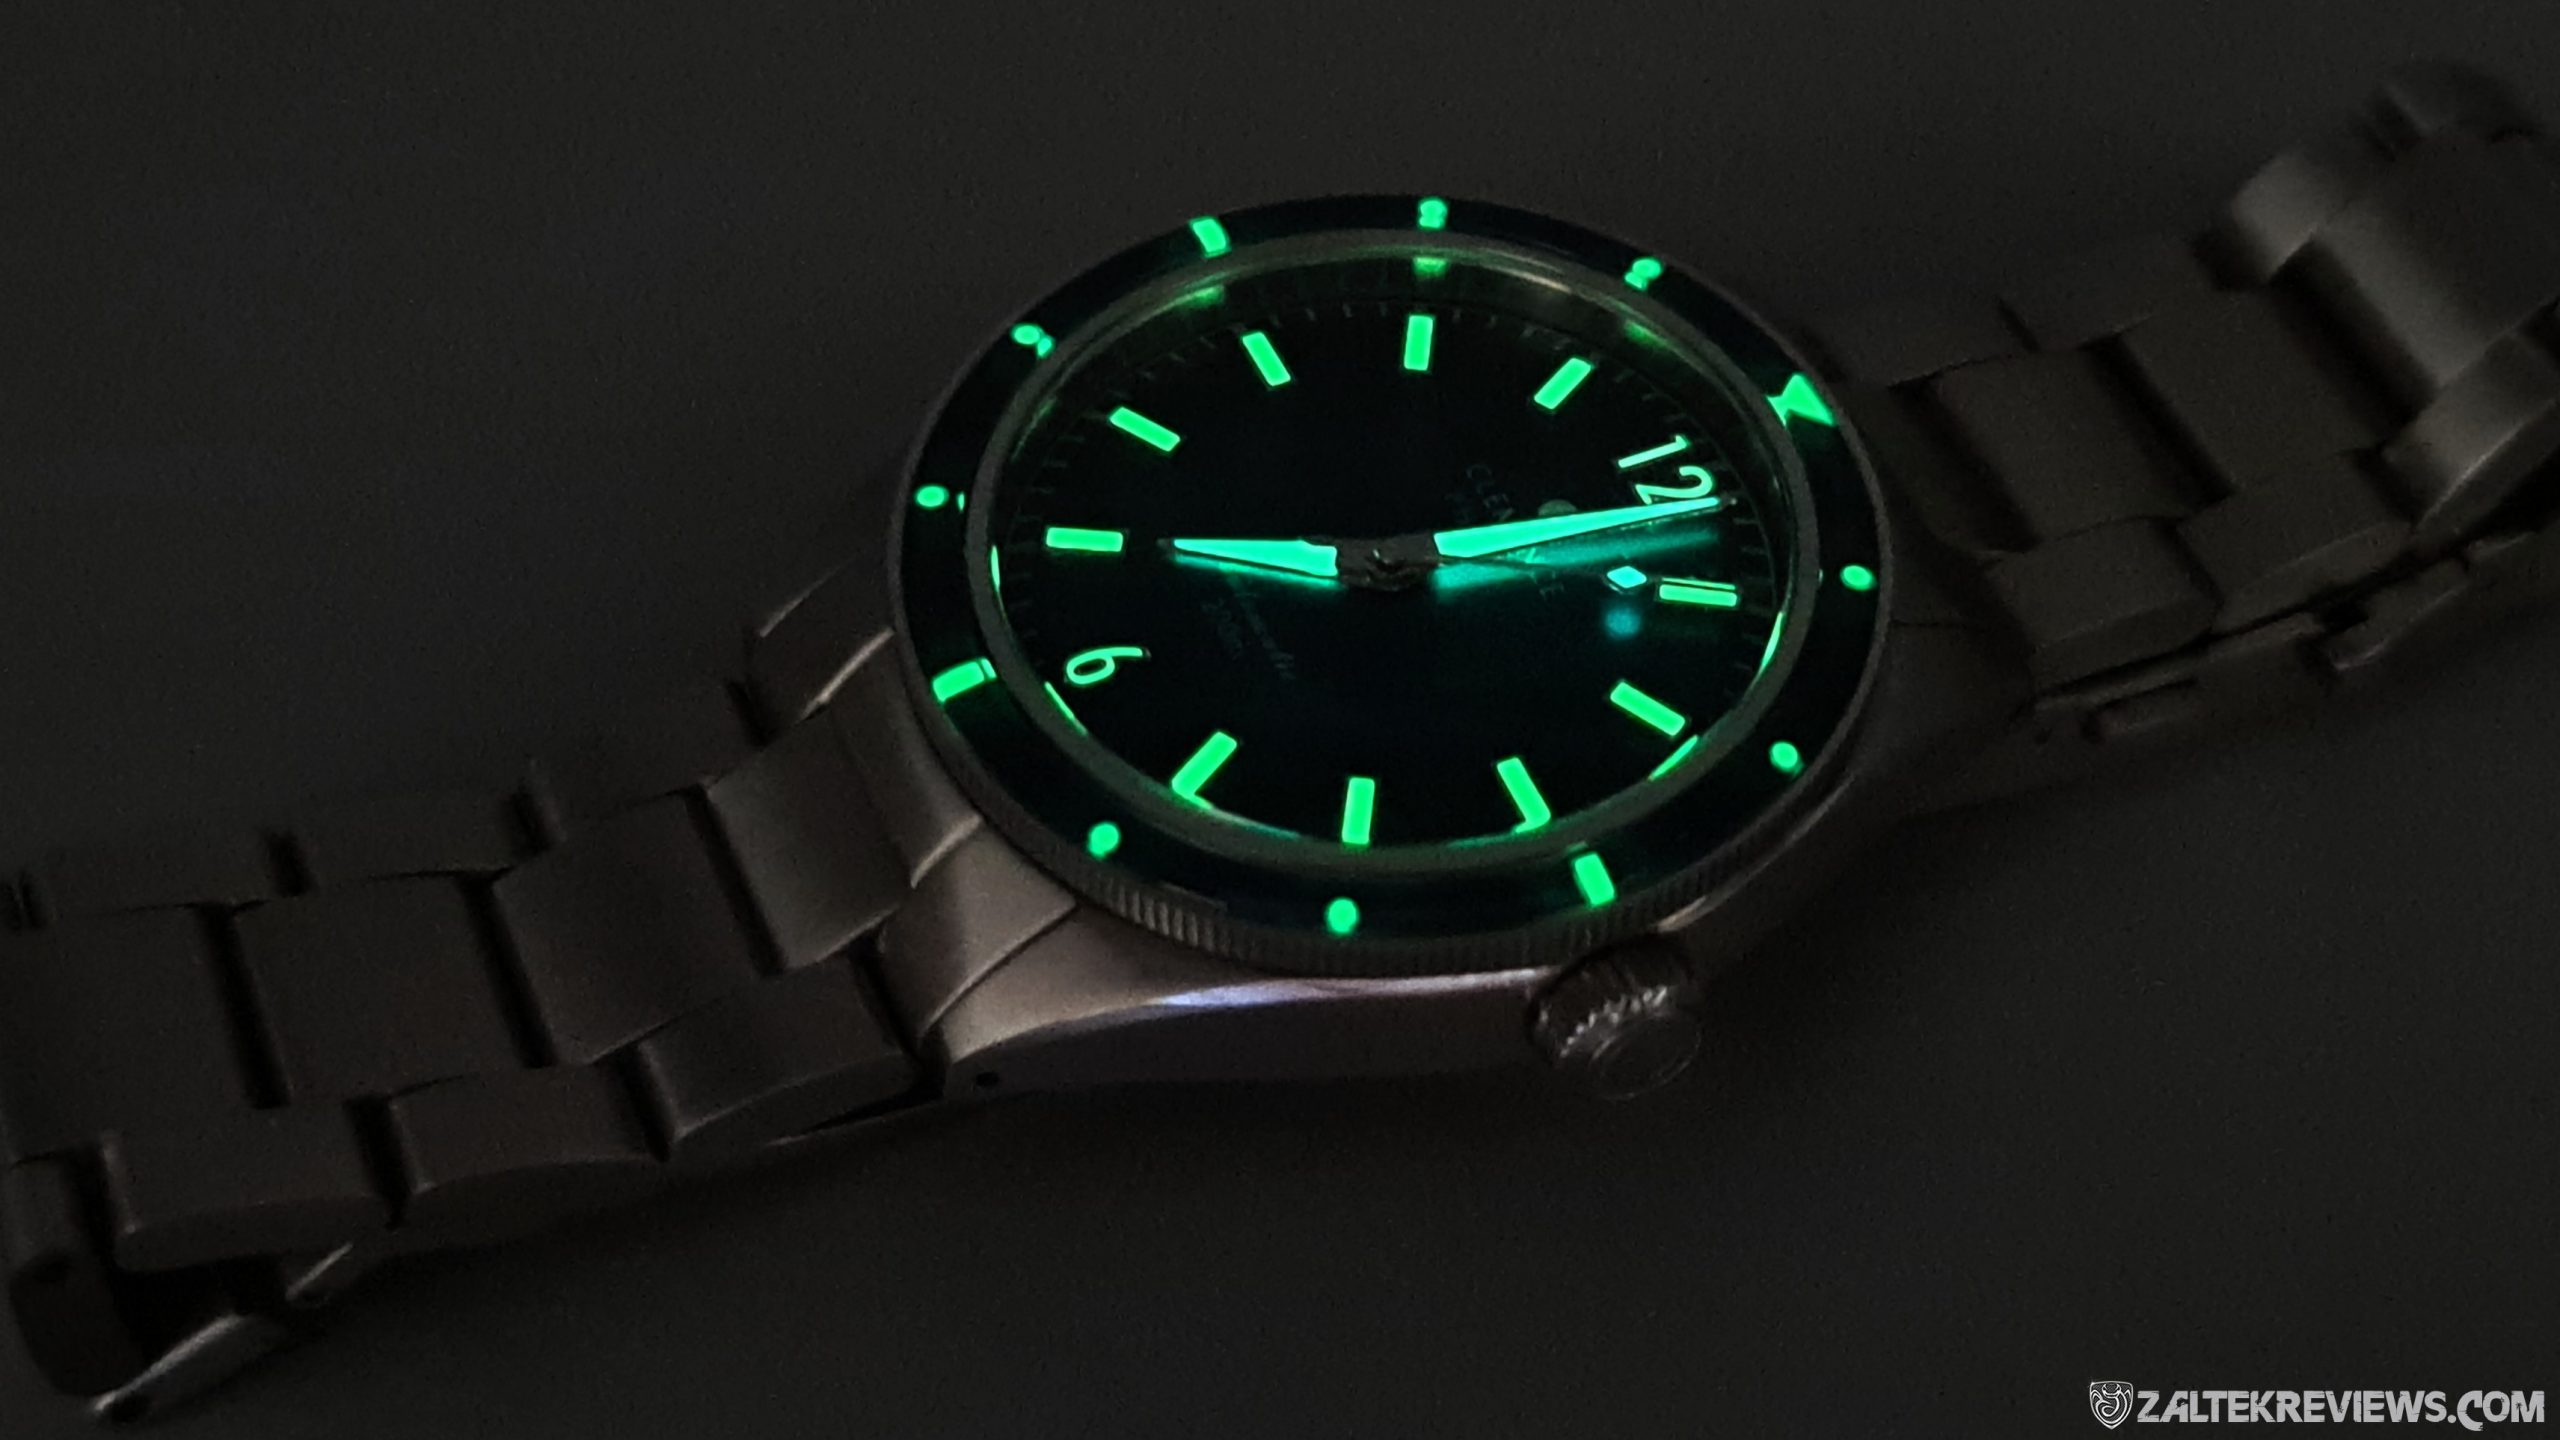 Clemence Photic Diver Review